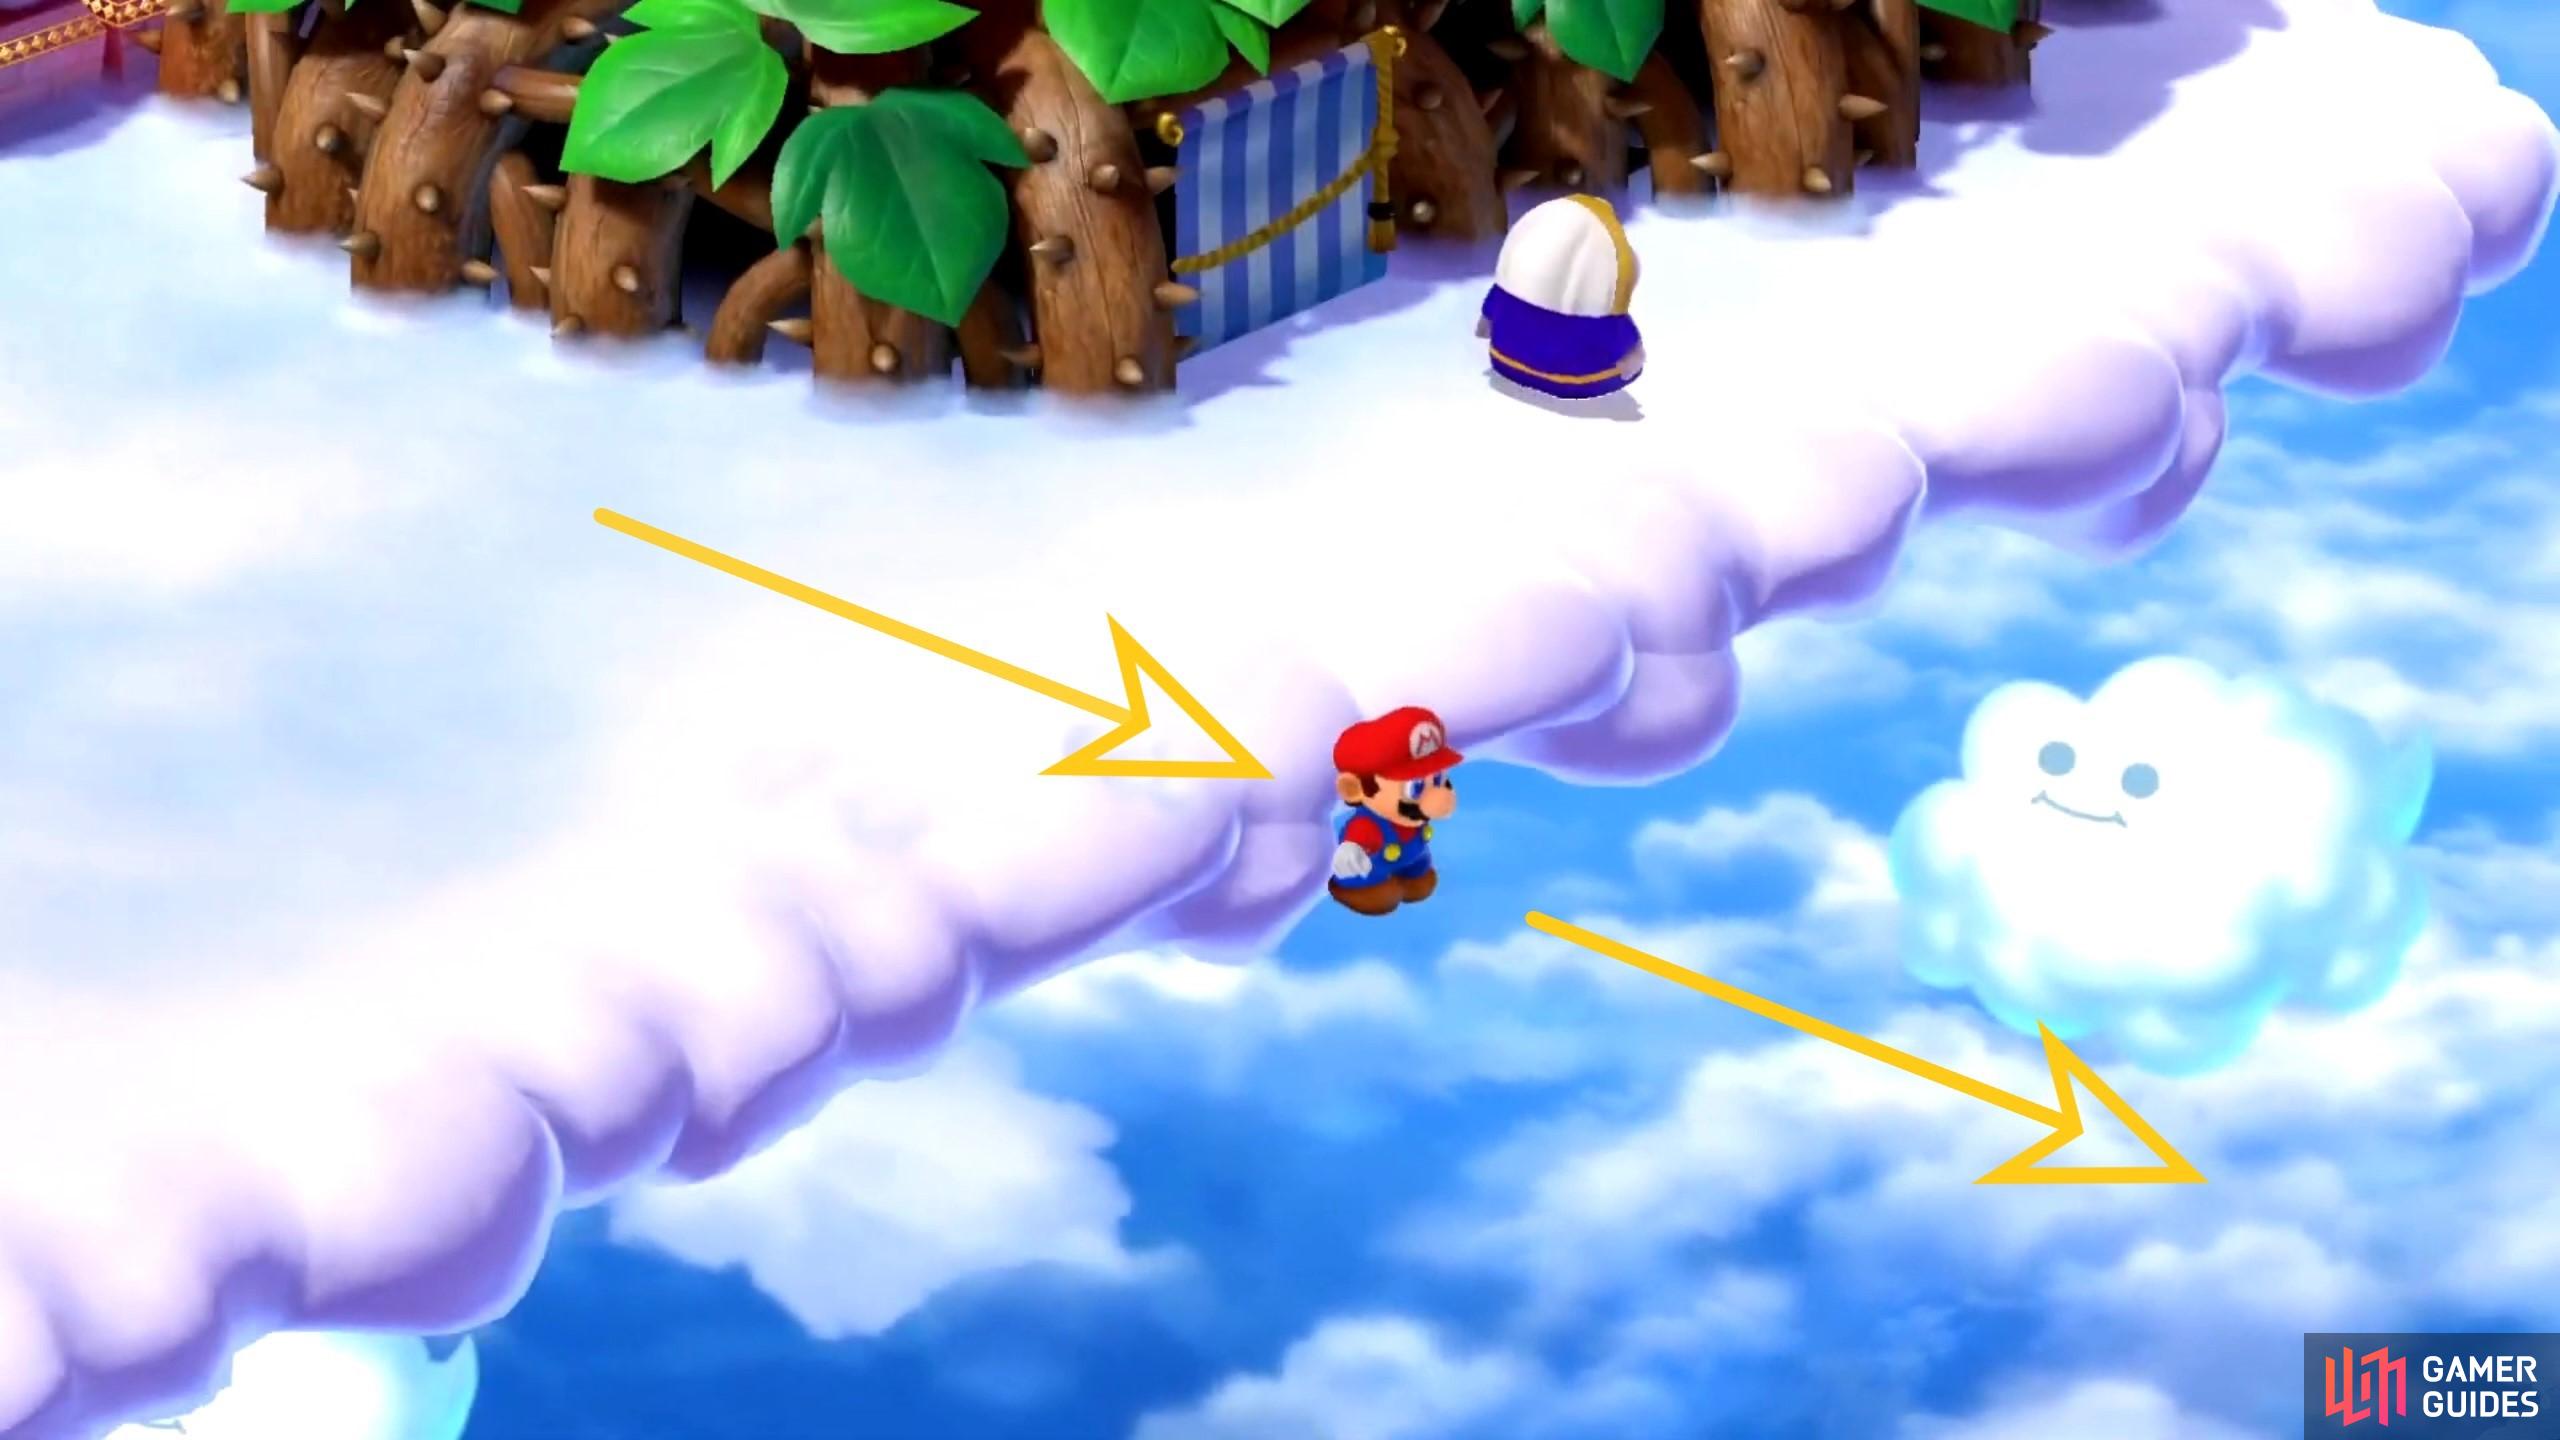 Head exactly to reveal a secret invisible path to the Shy Guy with the Fertilizer!